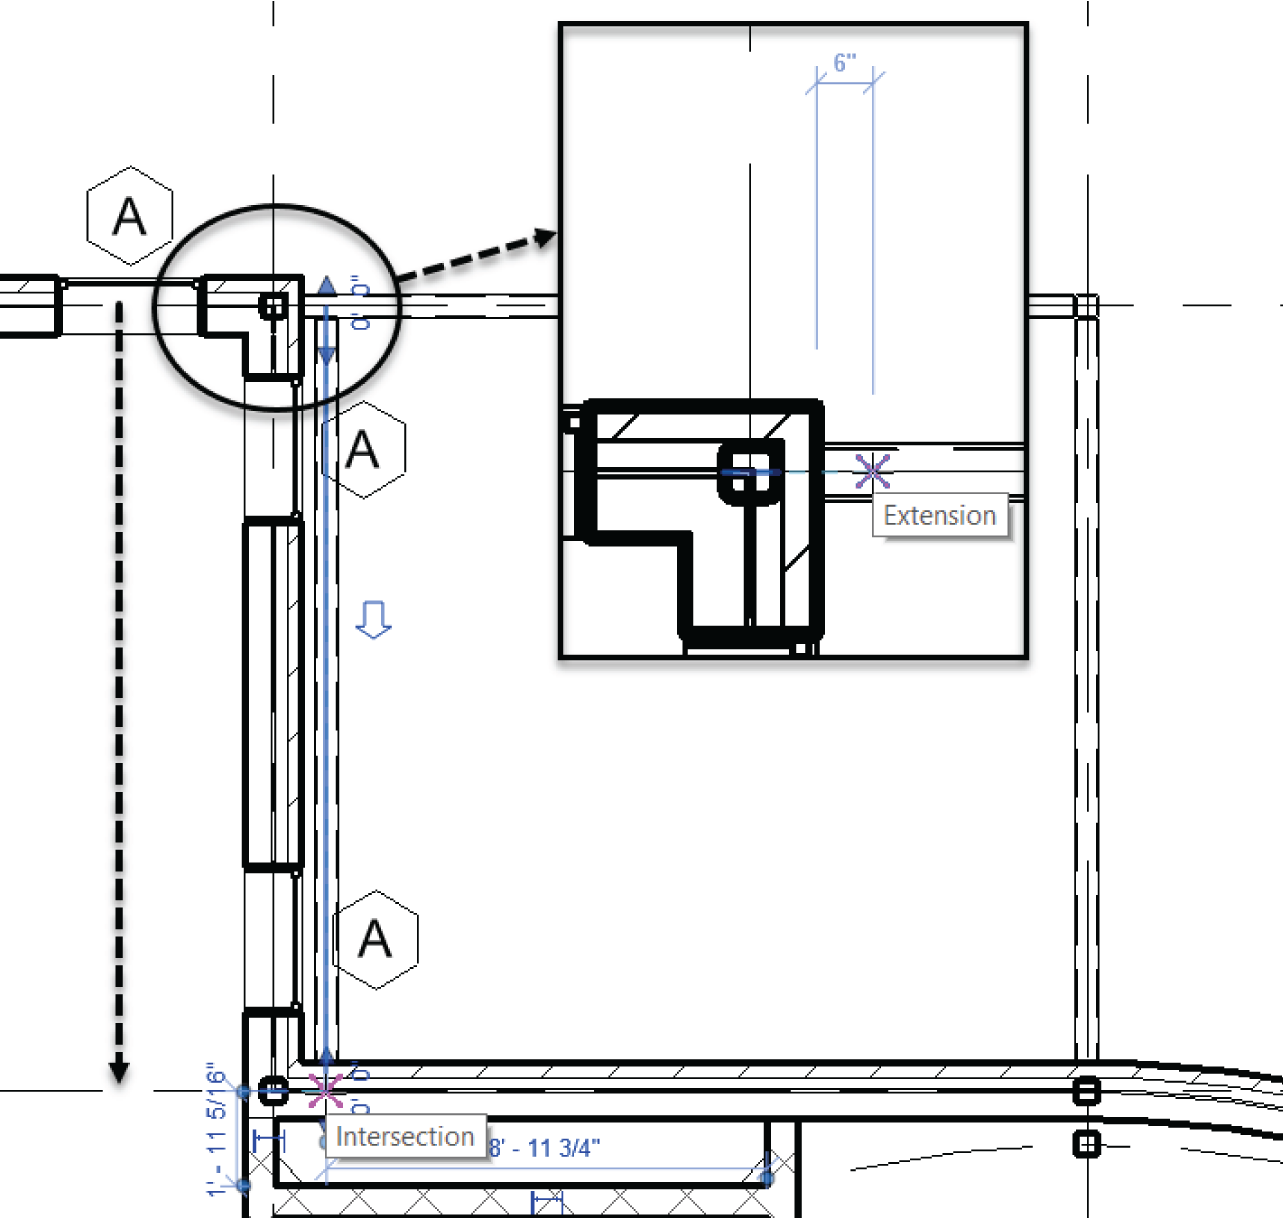 Adding a beam 6″ (150 mm) off the face of the wall to column line 2